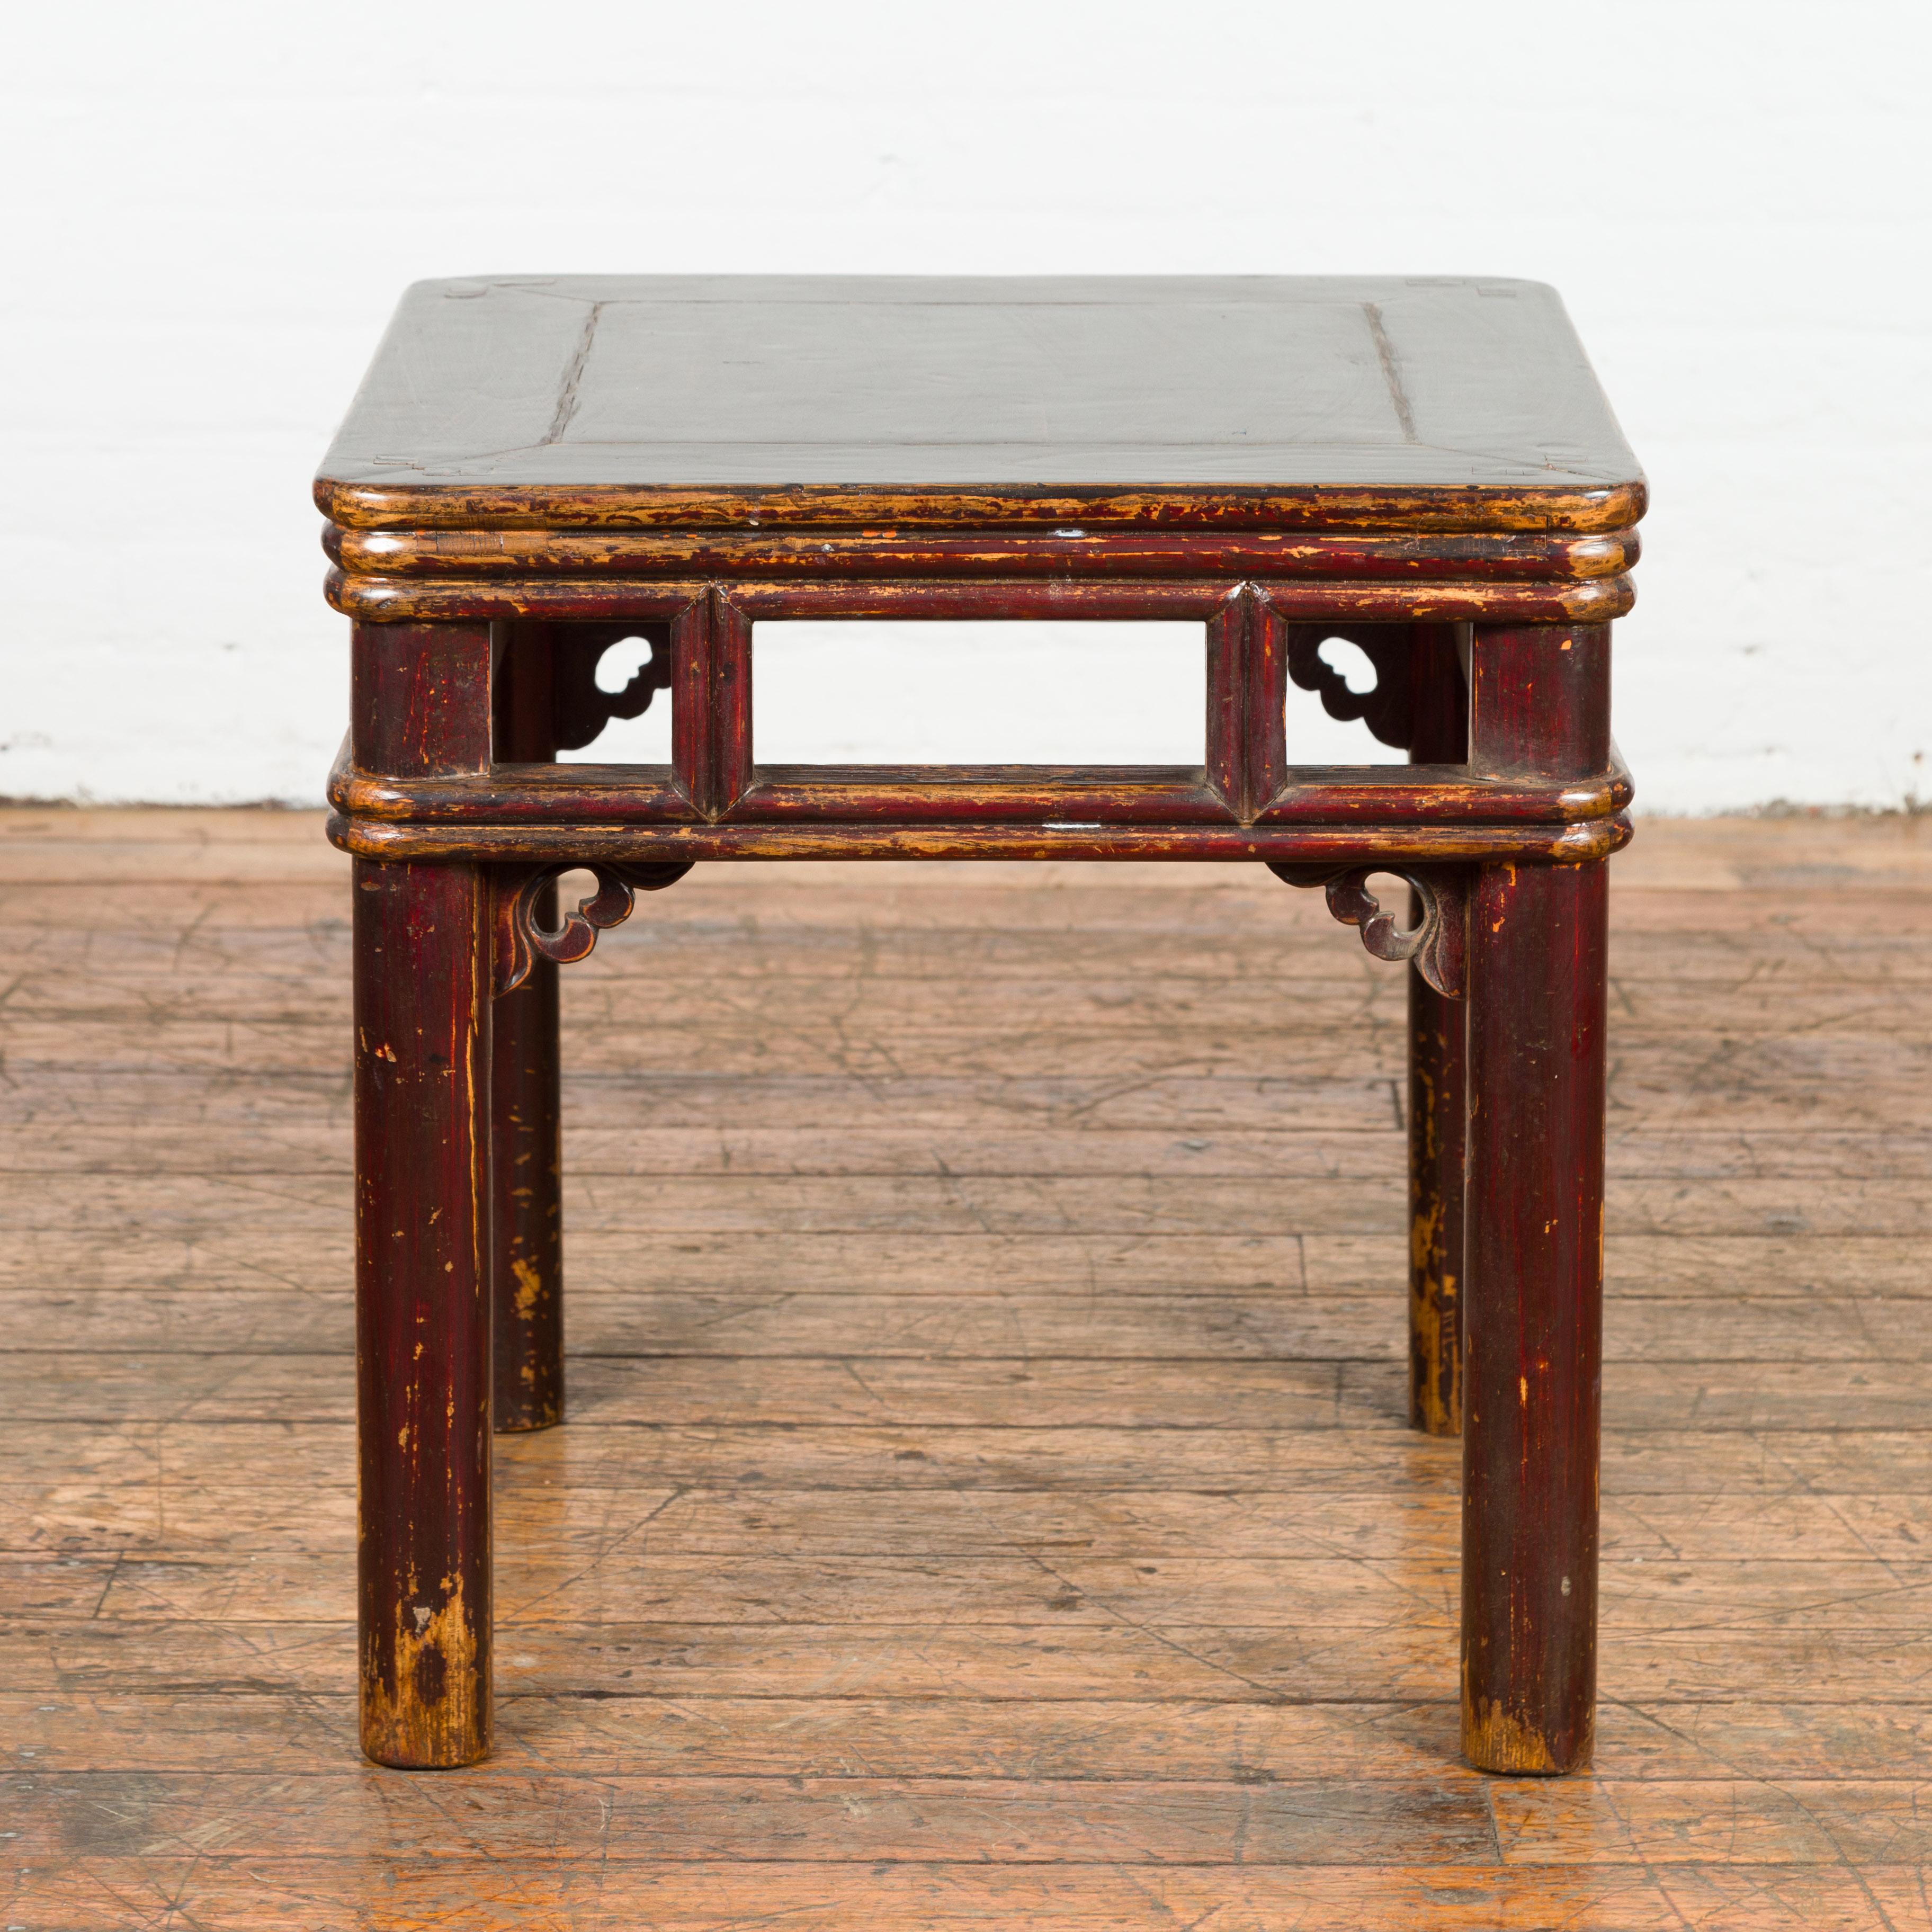 A Chinese Qing Dynasty period elm wood stool or side table from the 19th century, with open apron, carved spandrels, pillar strut motifs and distressed patina. Discover the allure of historical craftsmanship with this Qing Dynasty period Chinese elm